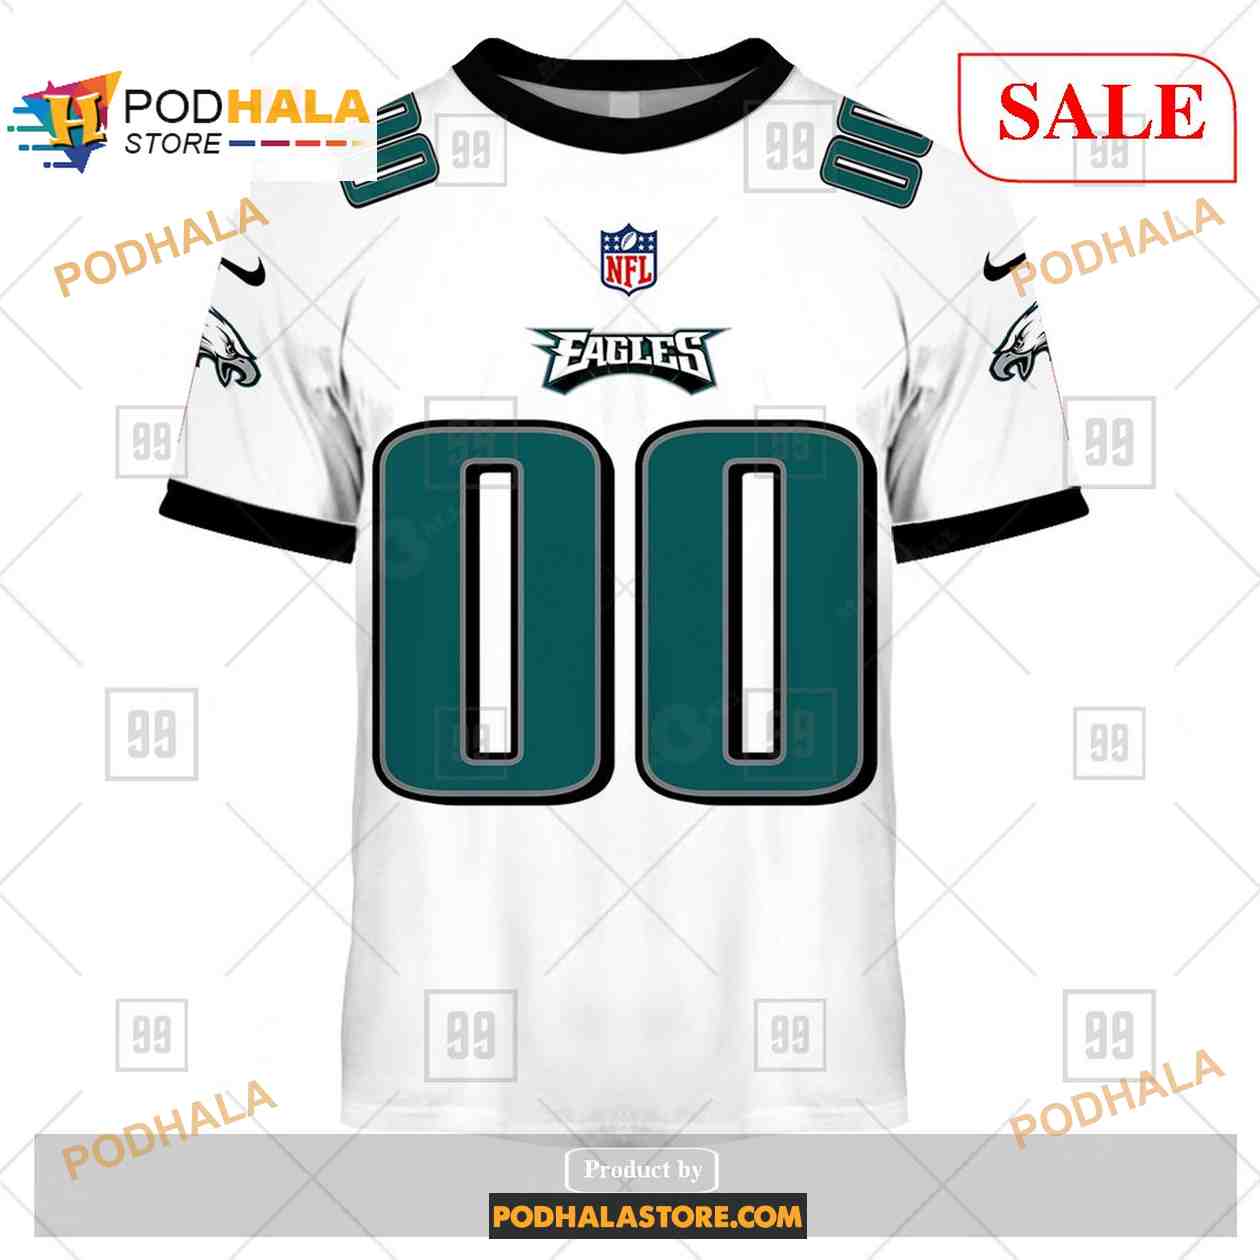 Buy It's A Philly Thing Philadelphia Eagles NFL Shirt For Free Shipping  CUSTOM XMAS PRODUCT COMPANY